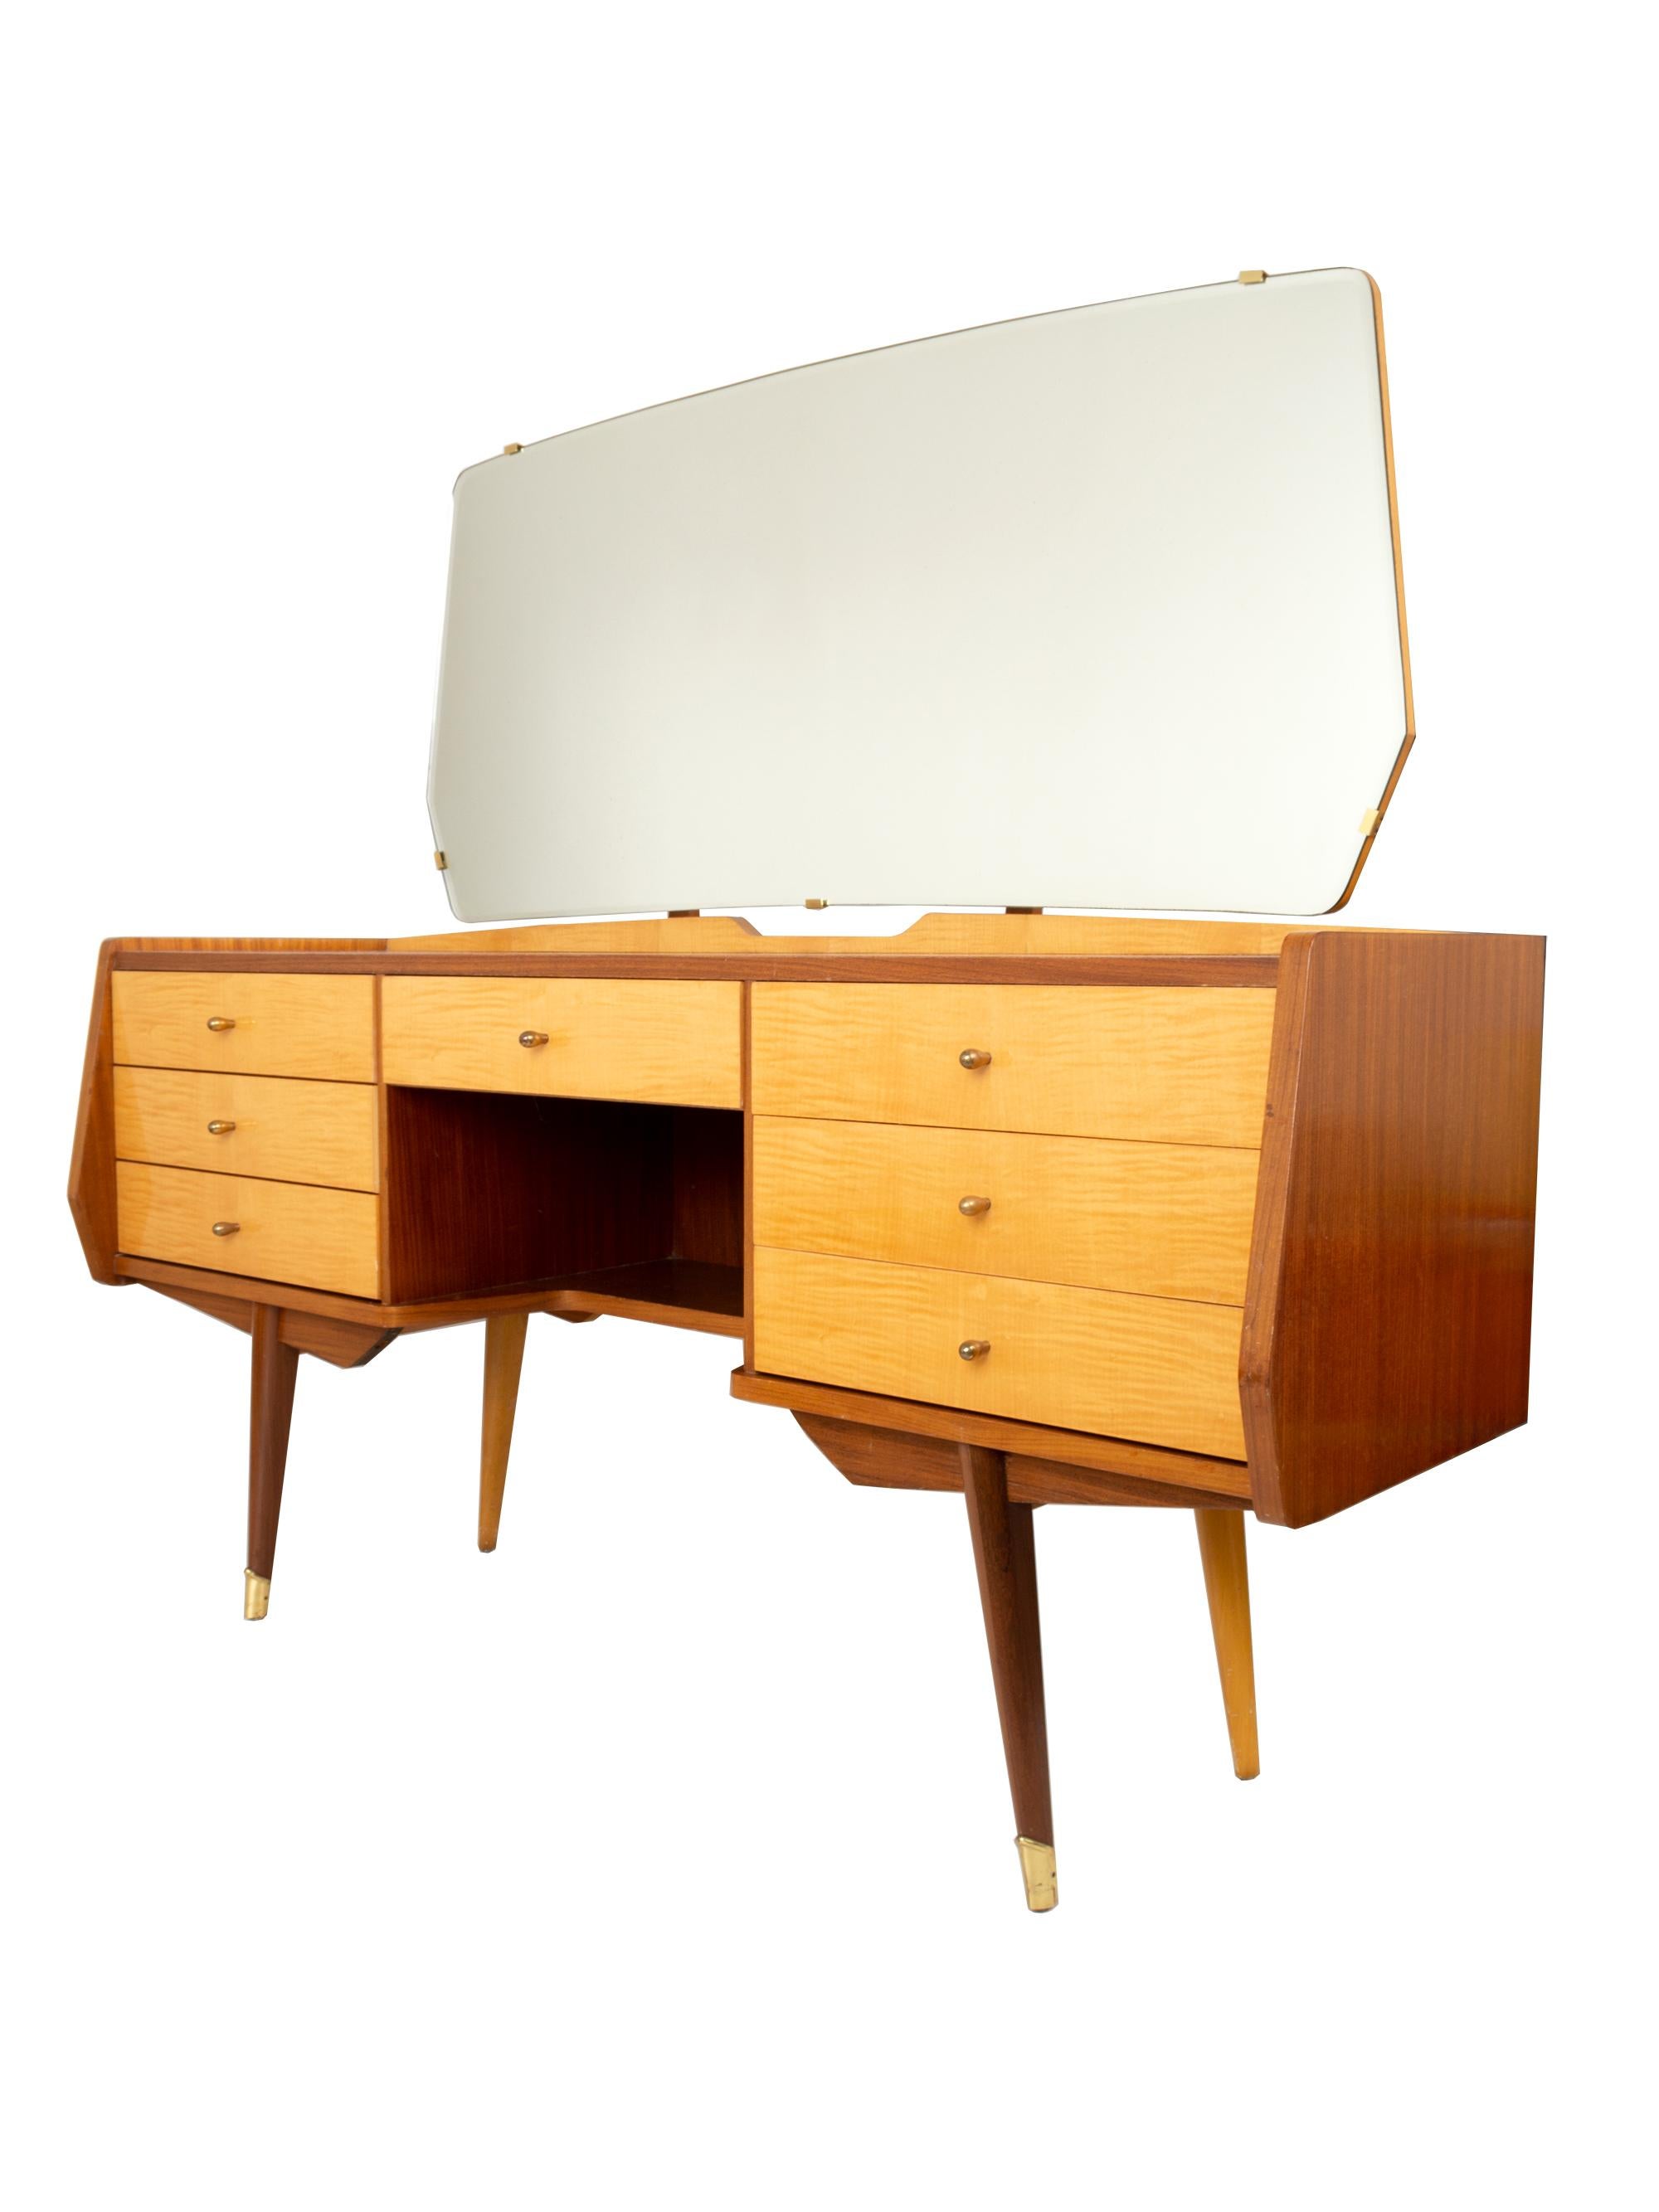 Mid century sycamore & walnut dressing table / vanity table. Italy, C.1950.
Finished in a high gloss lacquer with brass handles.
Well preserved. In excellent vintage condition.

Dimensions:
Height: 127 / 73cm
Length: 141cm
Depth: 40cm.